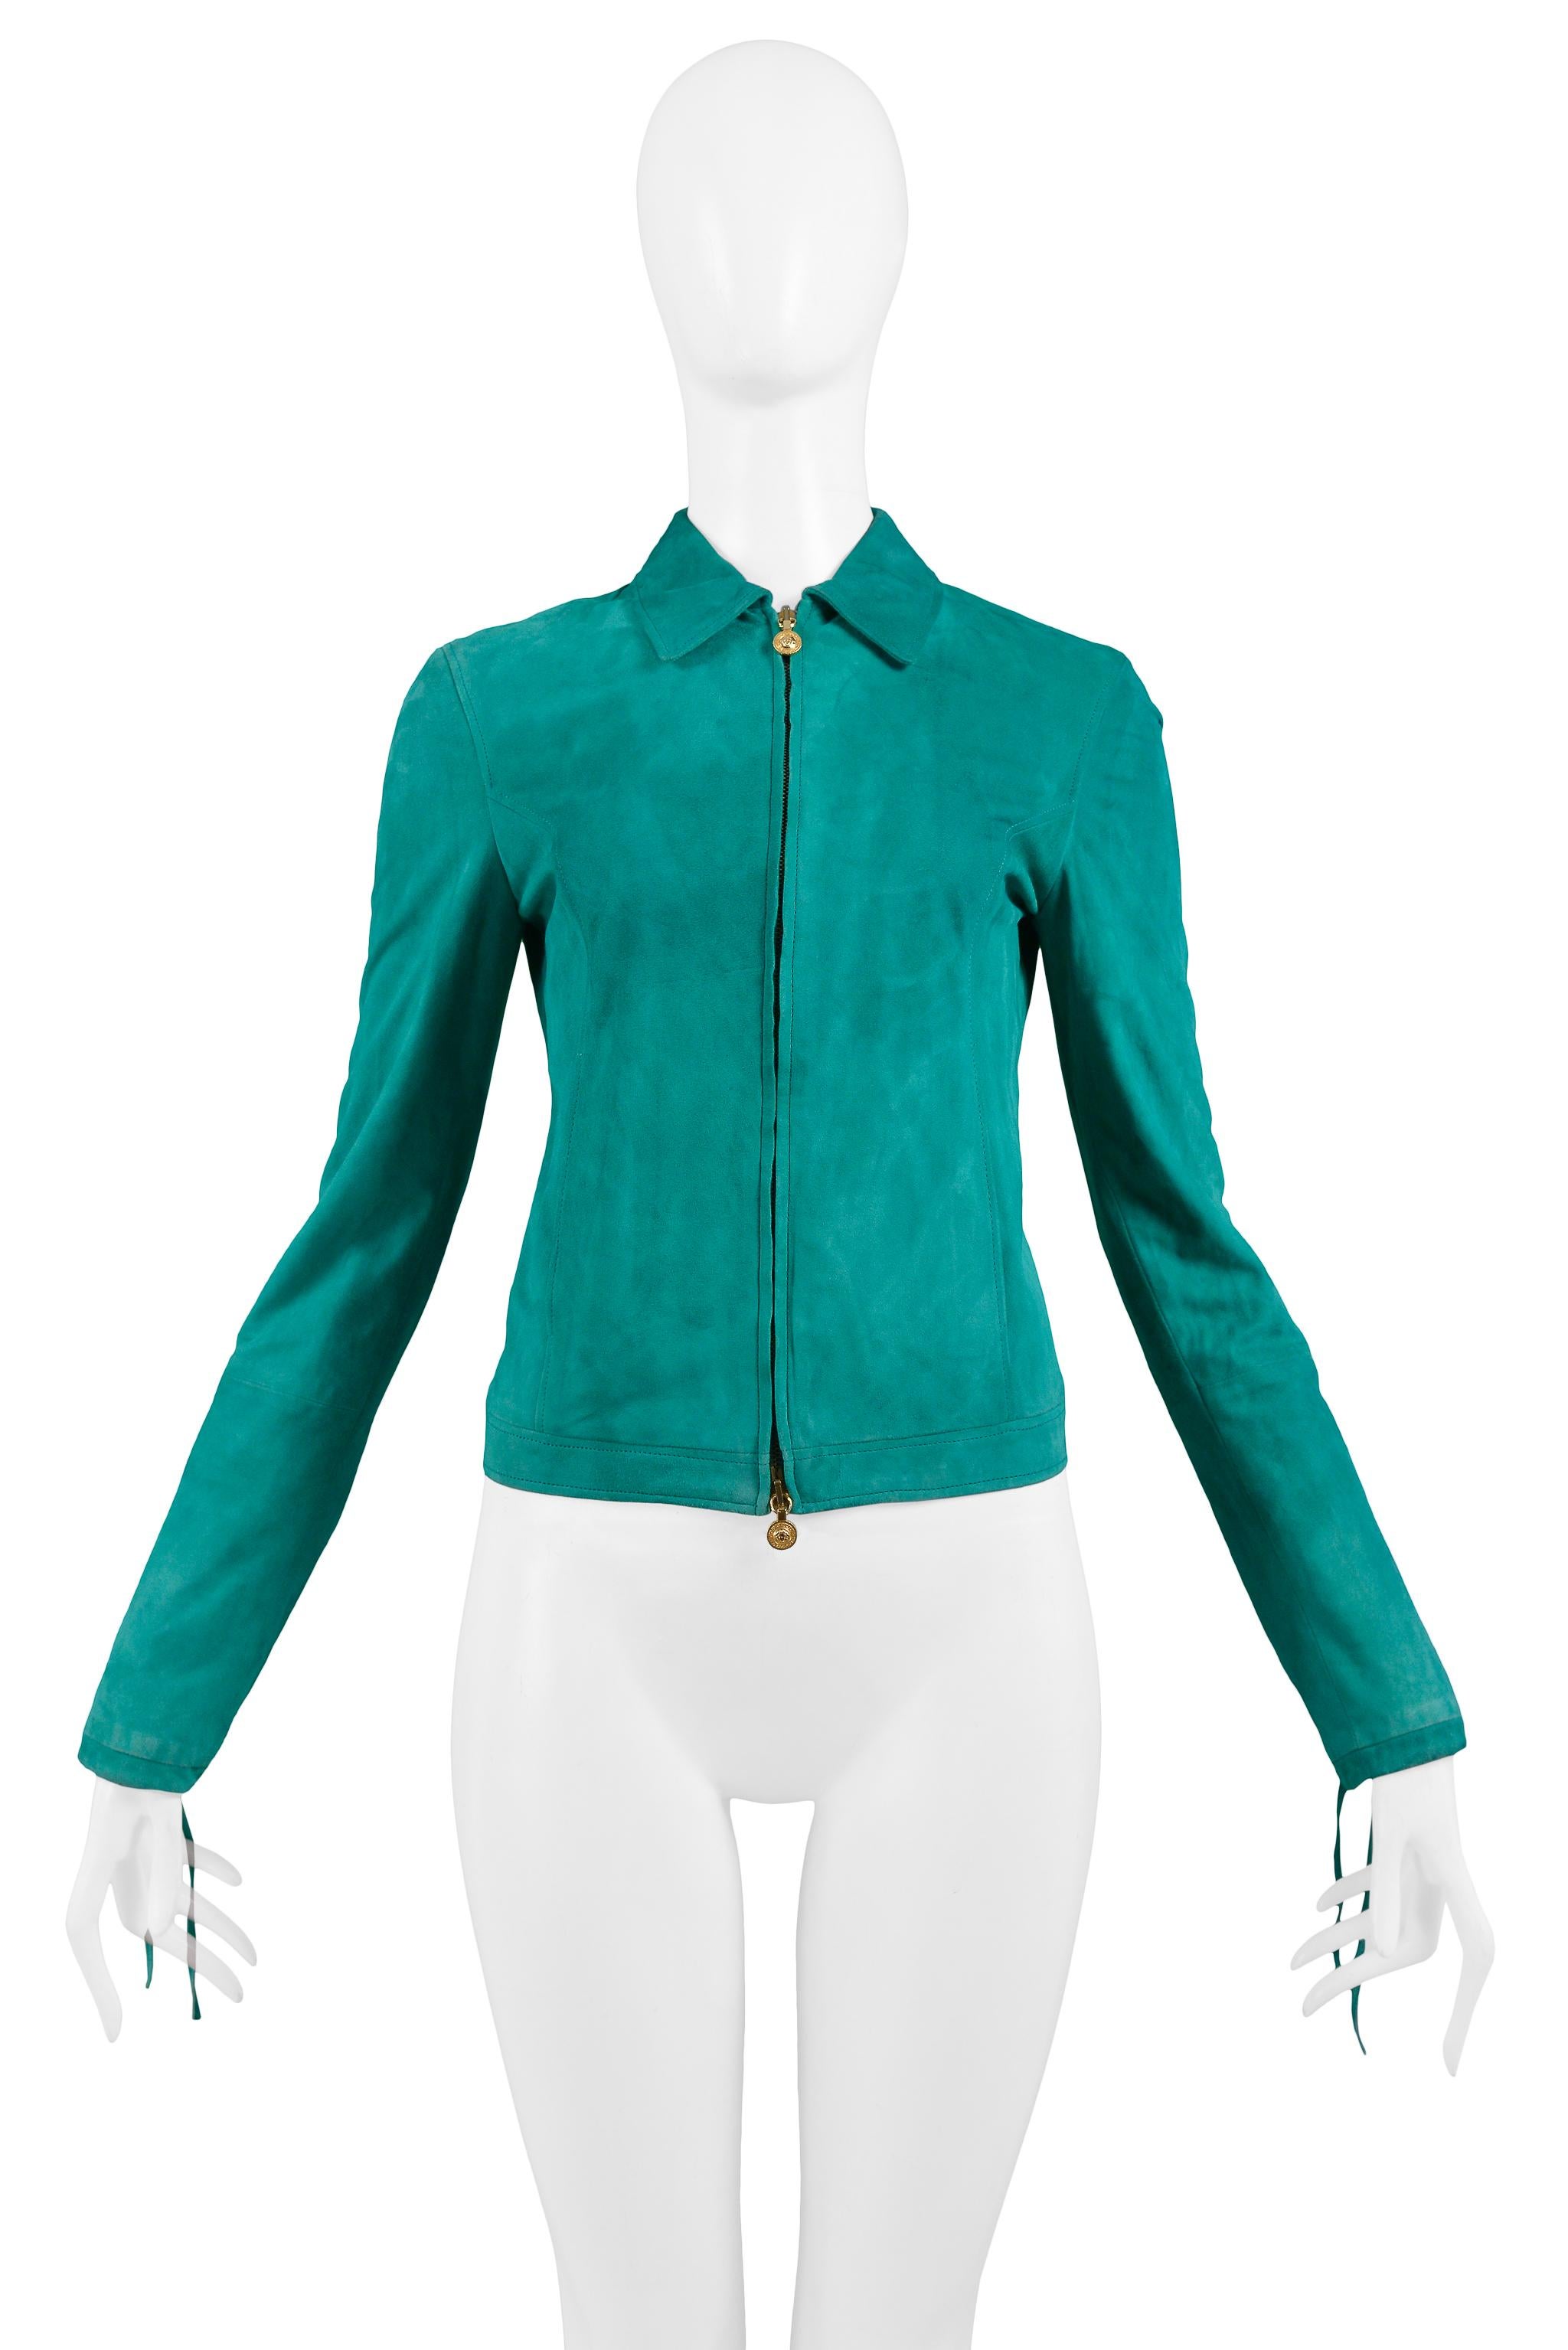 Resurrection Vintage is excited to offer a vintage Versace teal green suede jacket featuring a center front zipper with gold Medusa zipper pulls, and slits at lower sleeves with ties at cuffs.

Versace 
Measurements: Shoulder 13.5